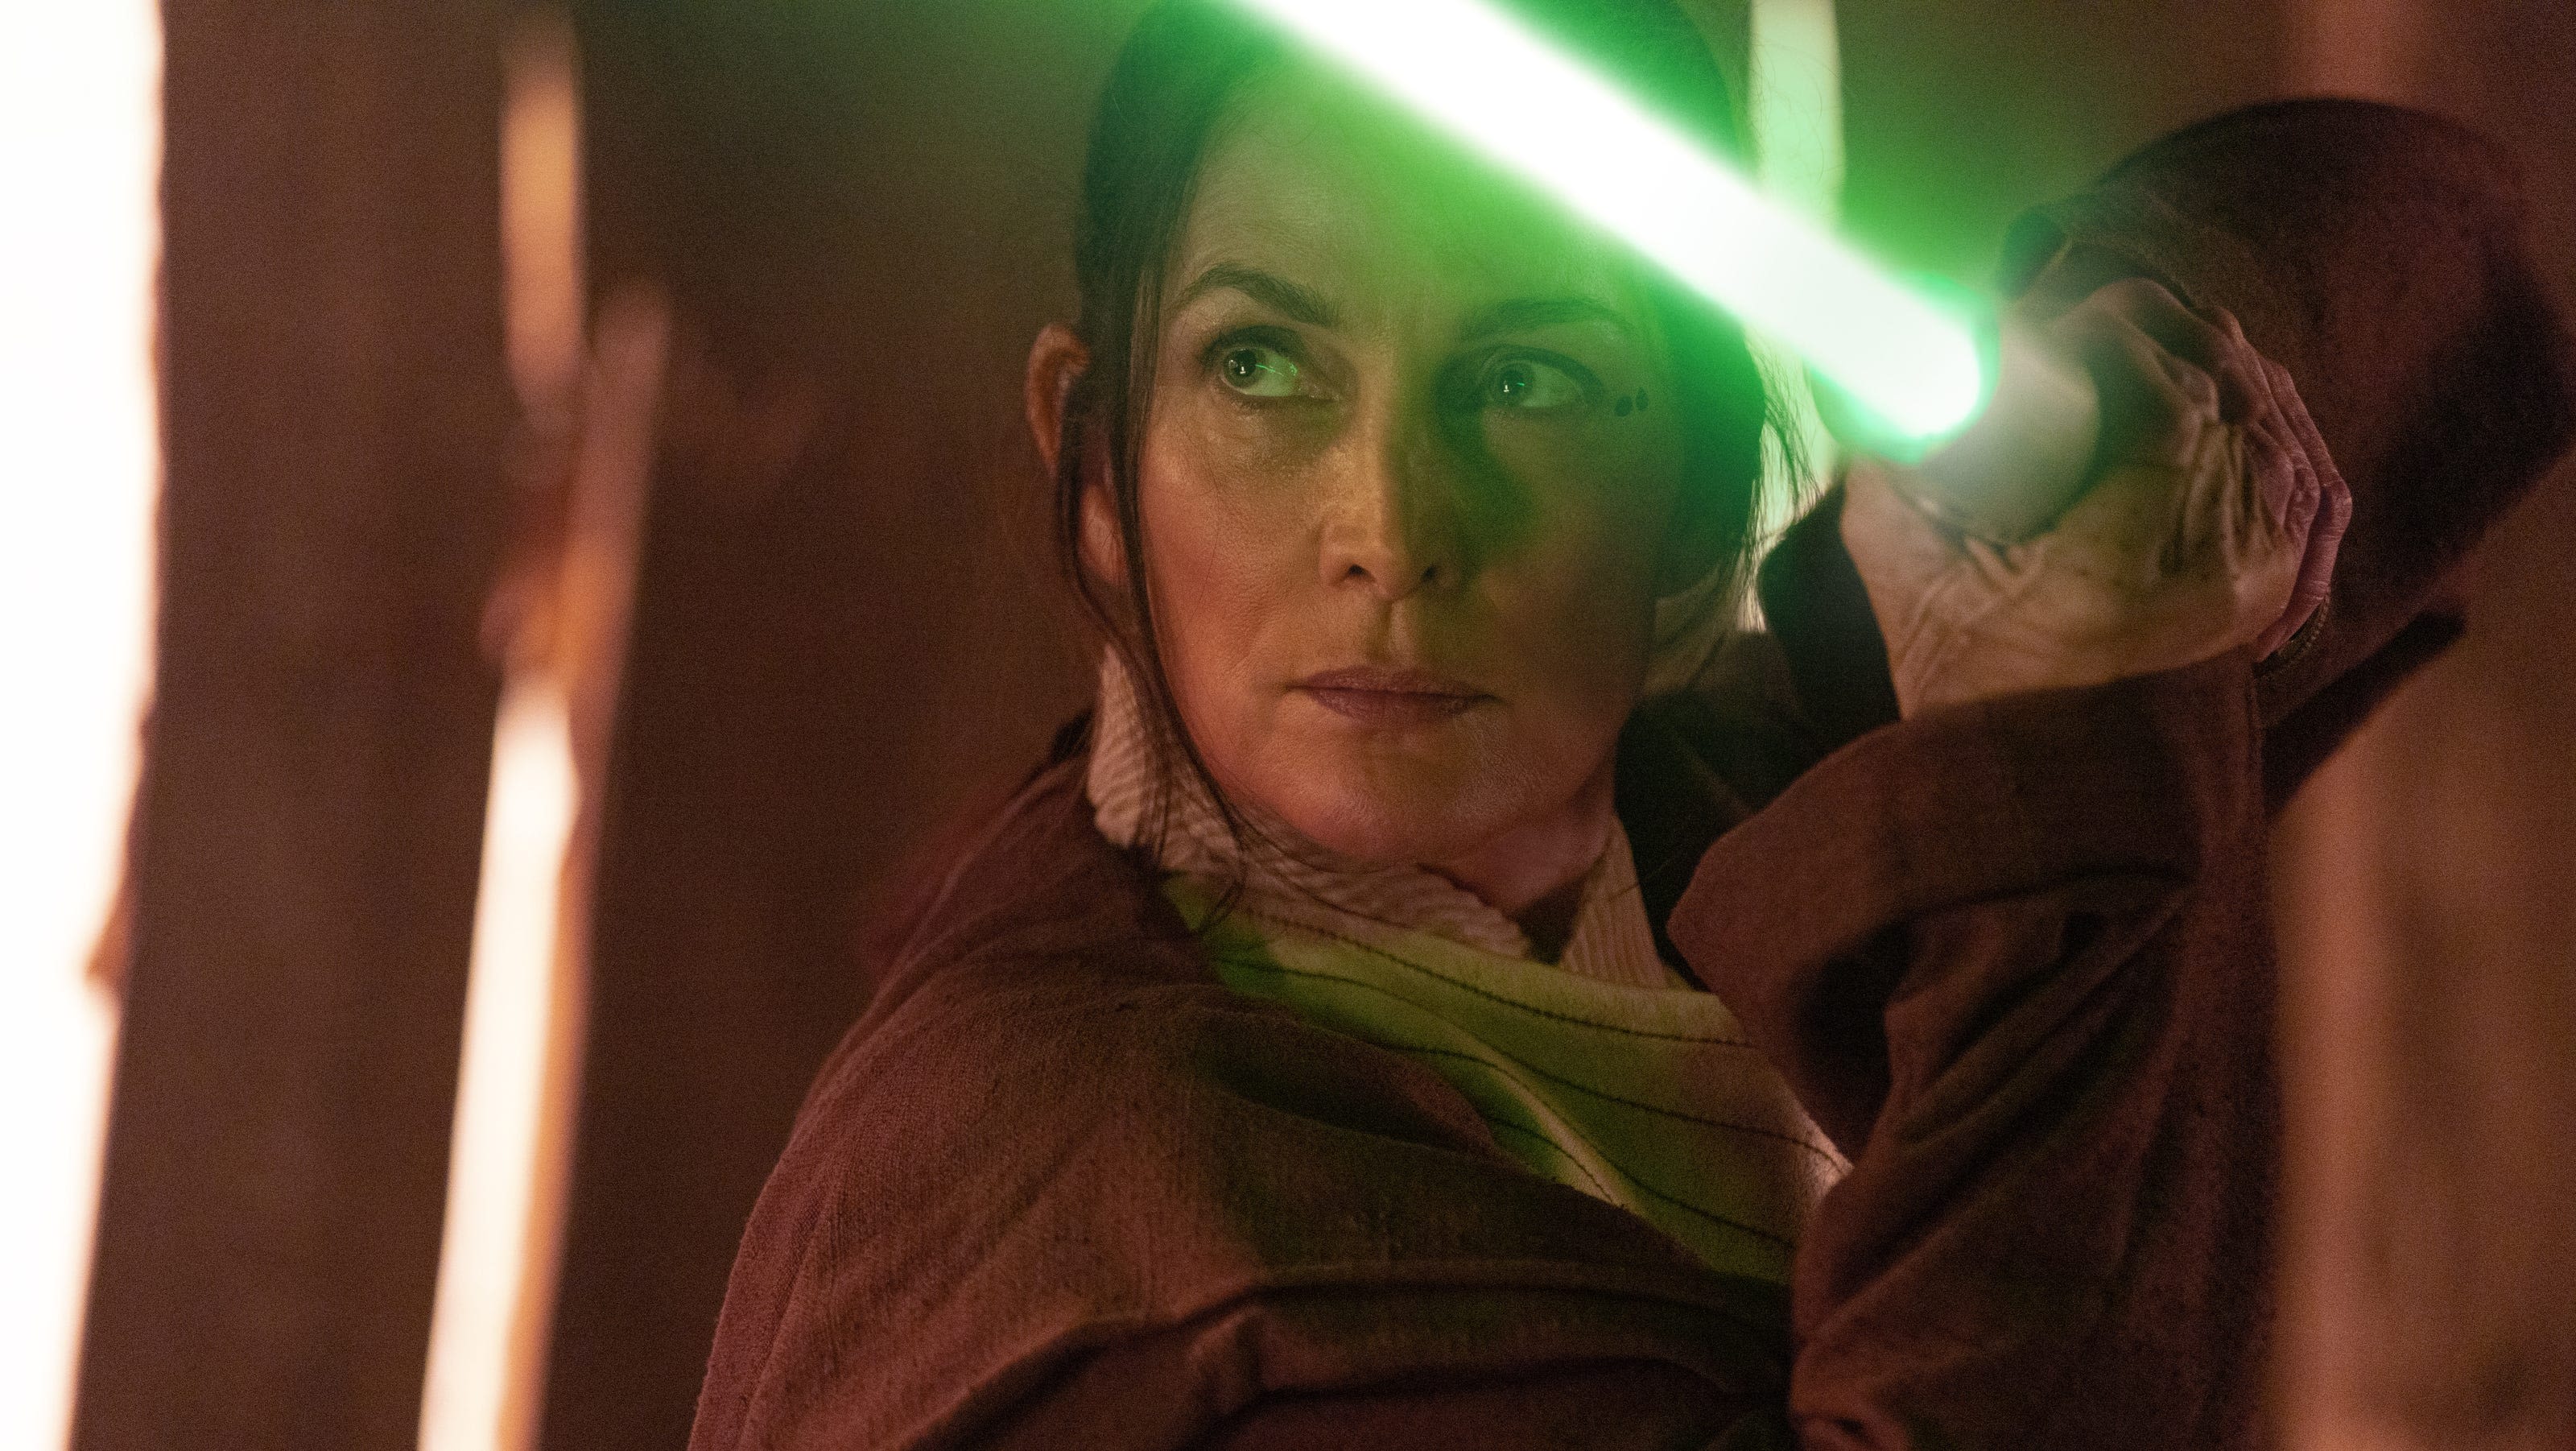 New 'The Acolyte' trailer for May the 4th, plus 'Star Wars' movies, TV shows in the works